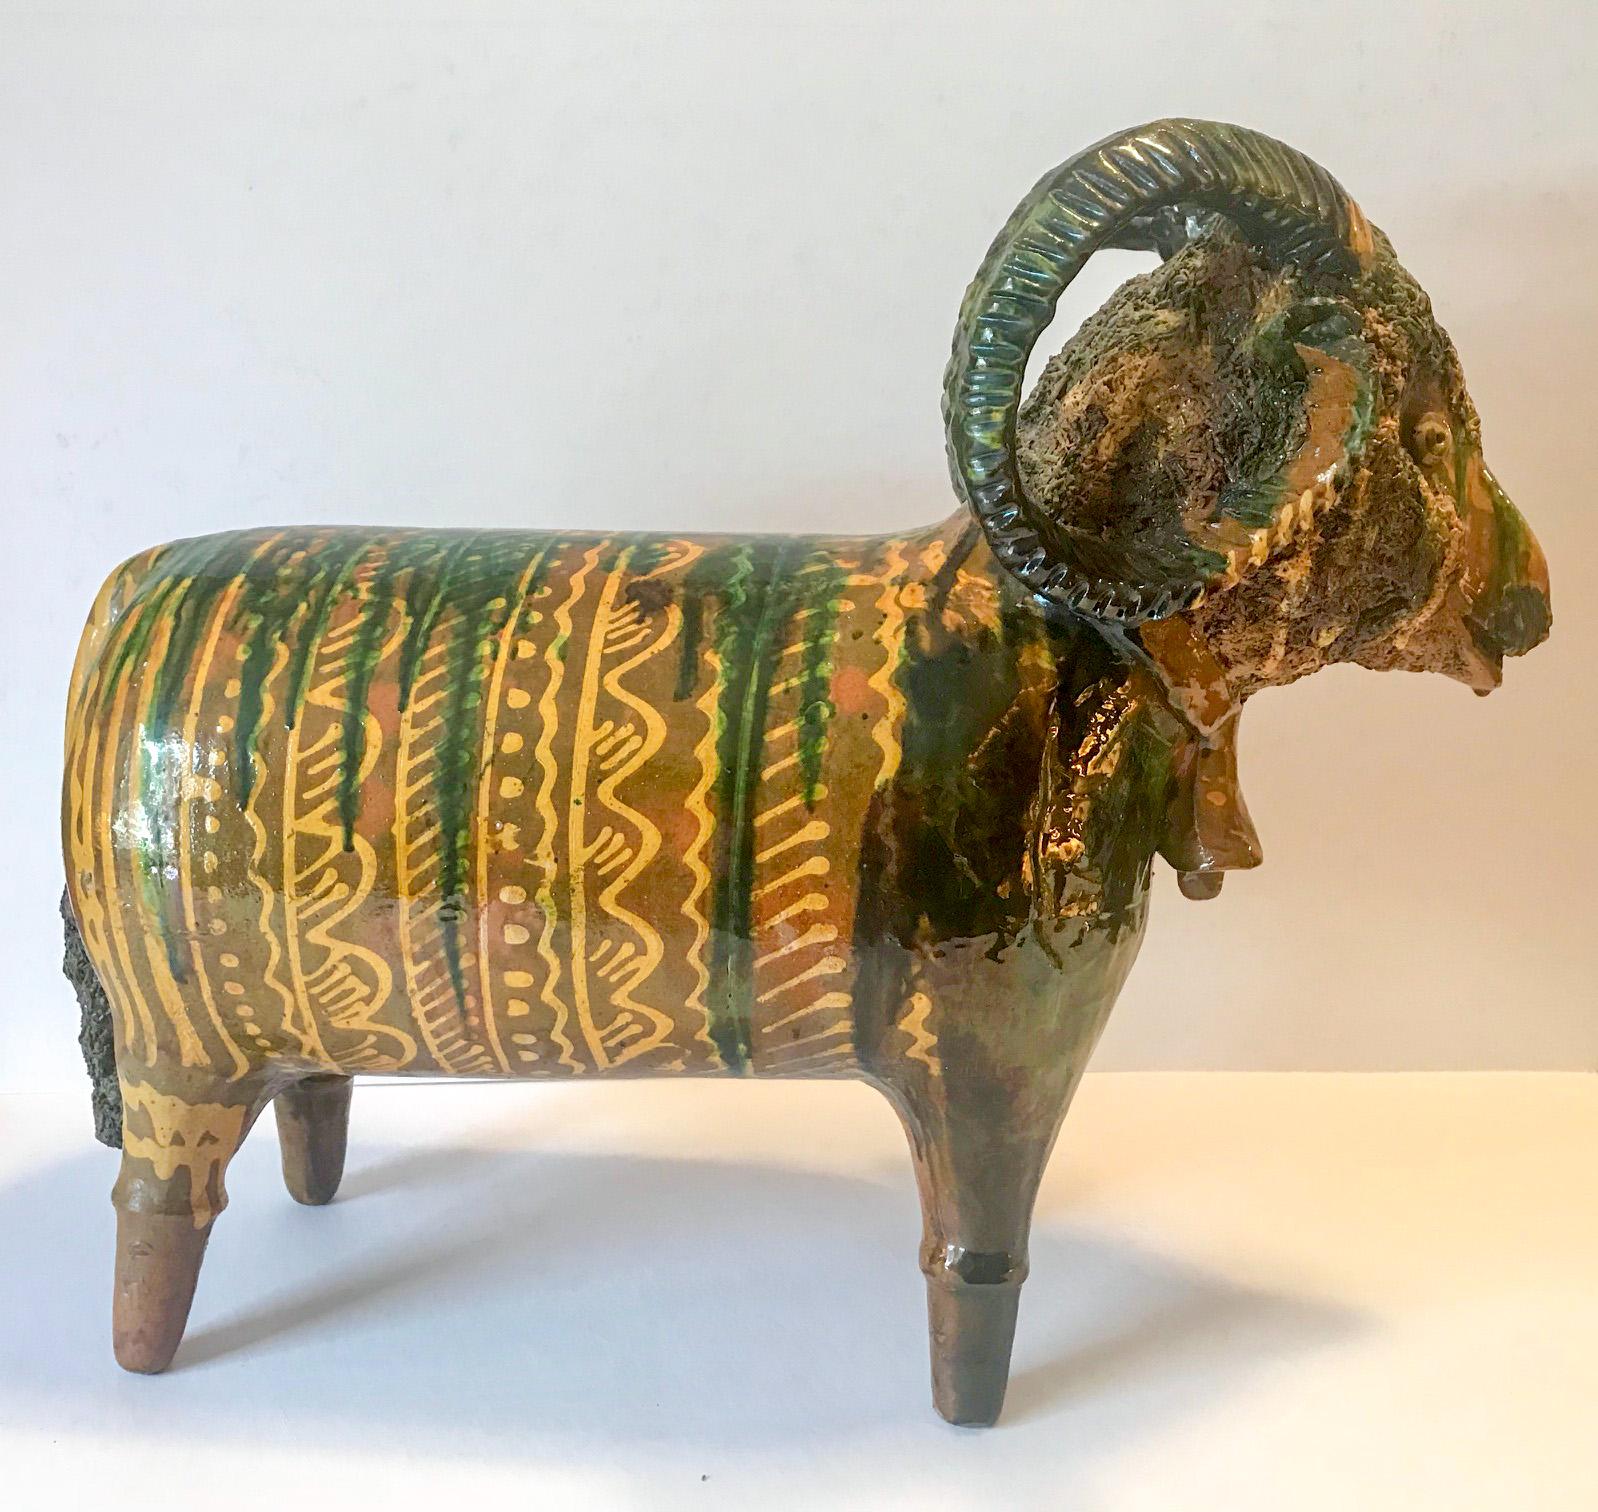 Large-sized redware figure of a ram with unknown origin. Mid-century, hand modeled ram with hollow body. Heavy applied spaghetti wool, applied tail and curled horns. Monogram and date incised underneath. The rams surface is covered in a brown,